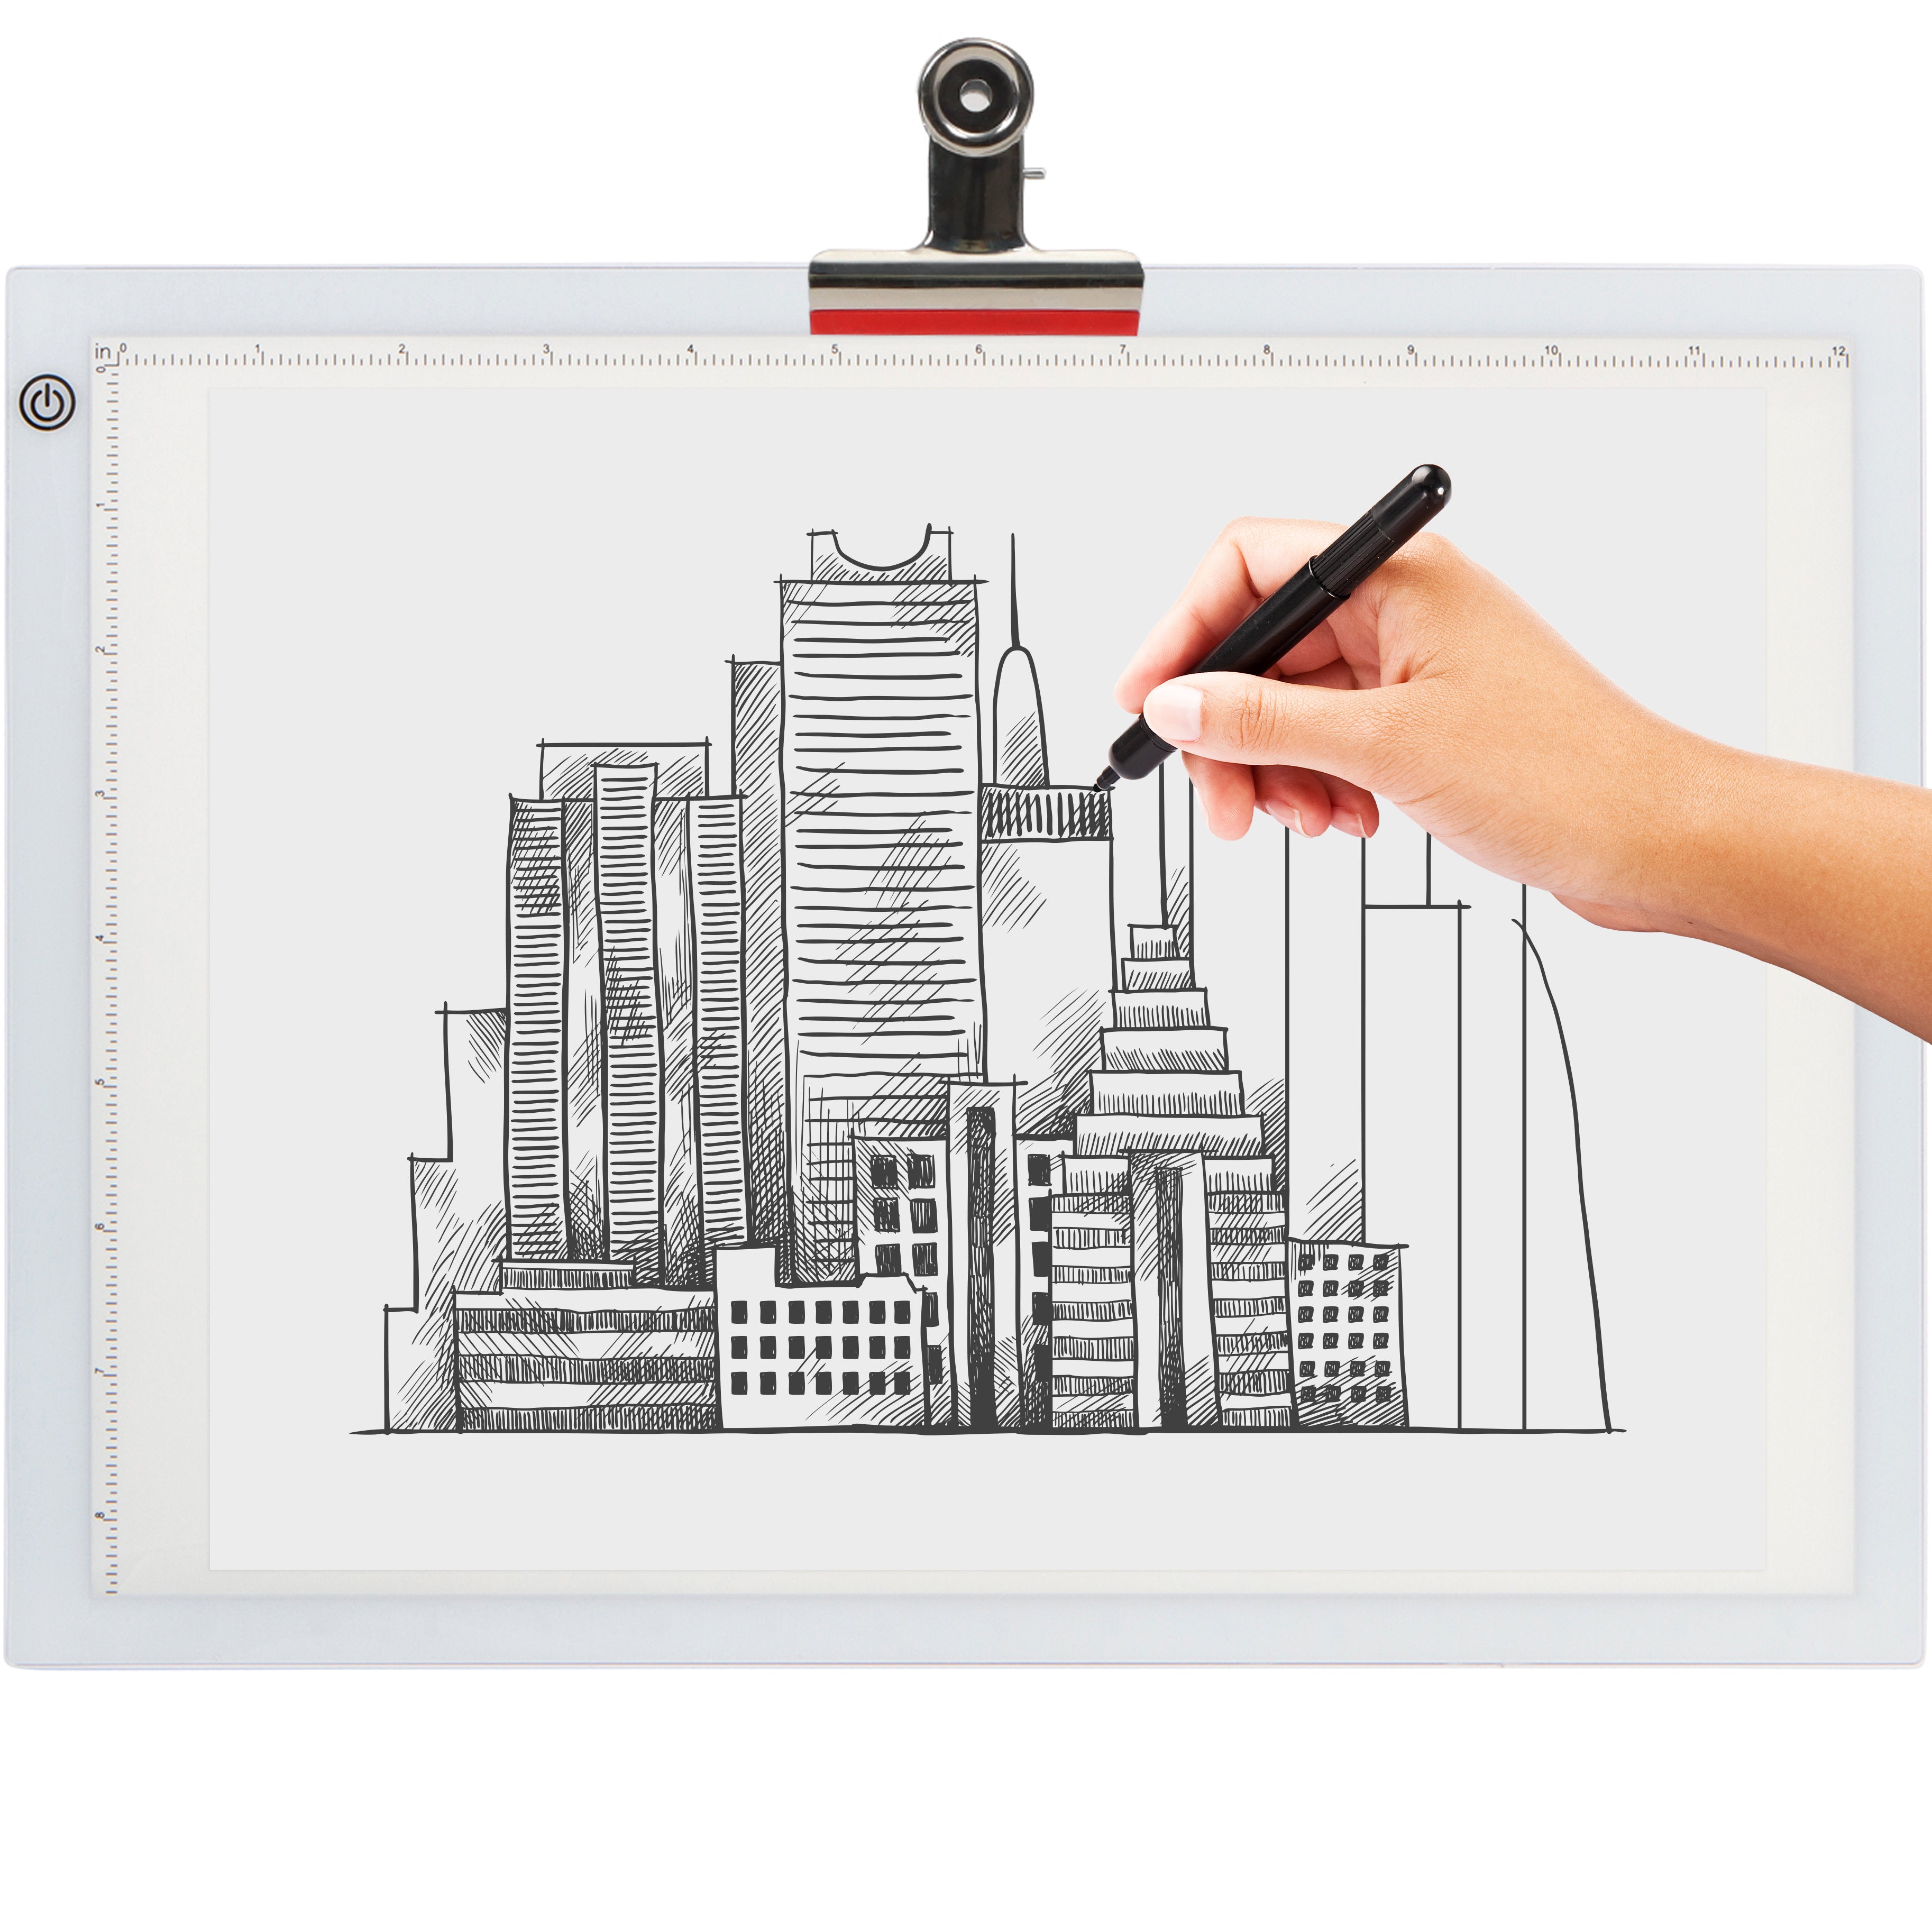 LED Light Box for Tracing by Dasher Products - New 2021 Model - 19 inch Ultra Thin Light Pad with Adjustable Brightness. Comes with USB Cable, Adapter